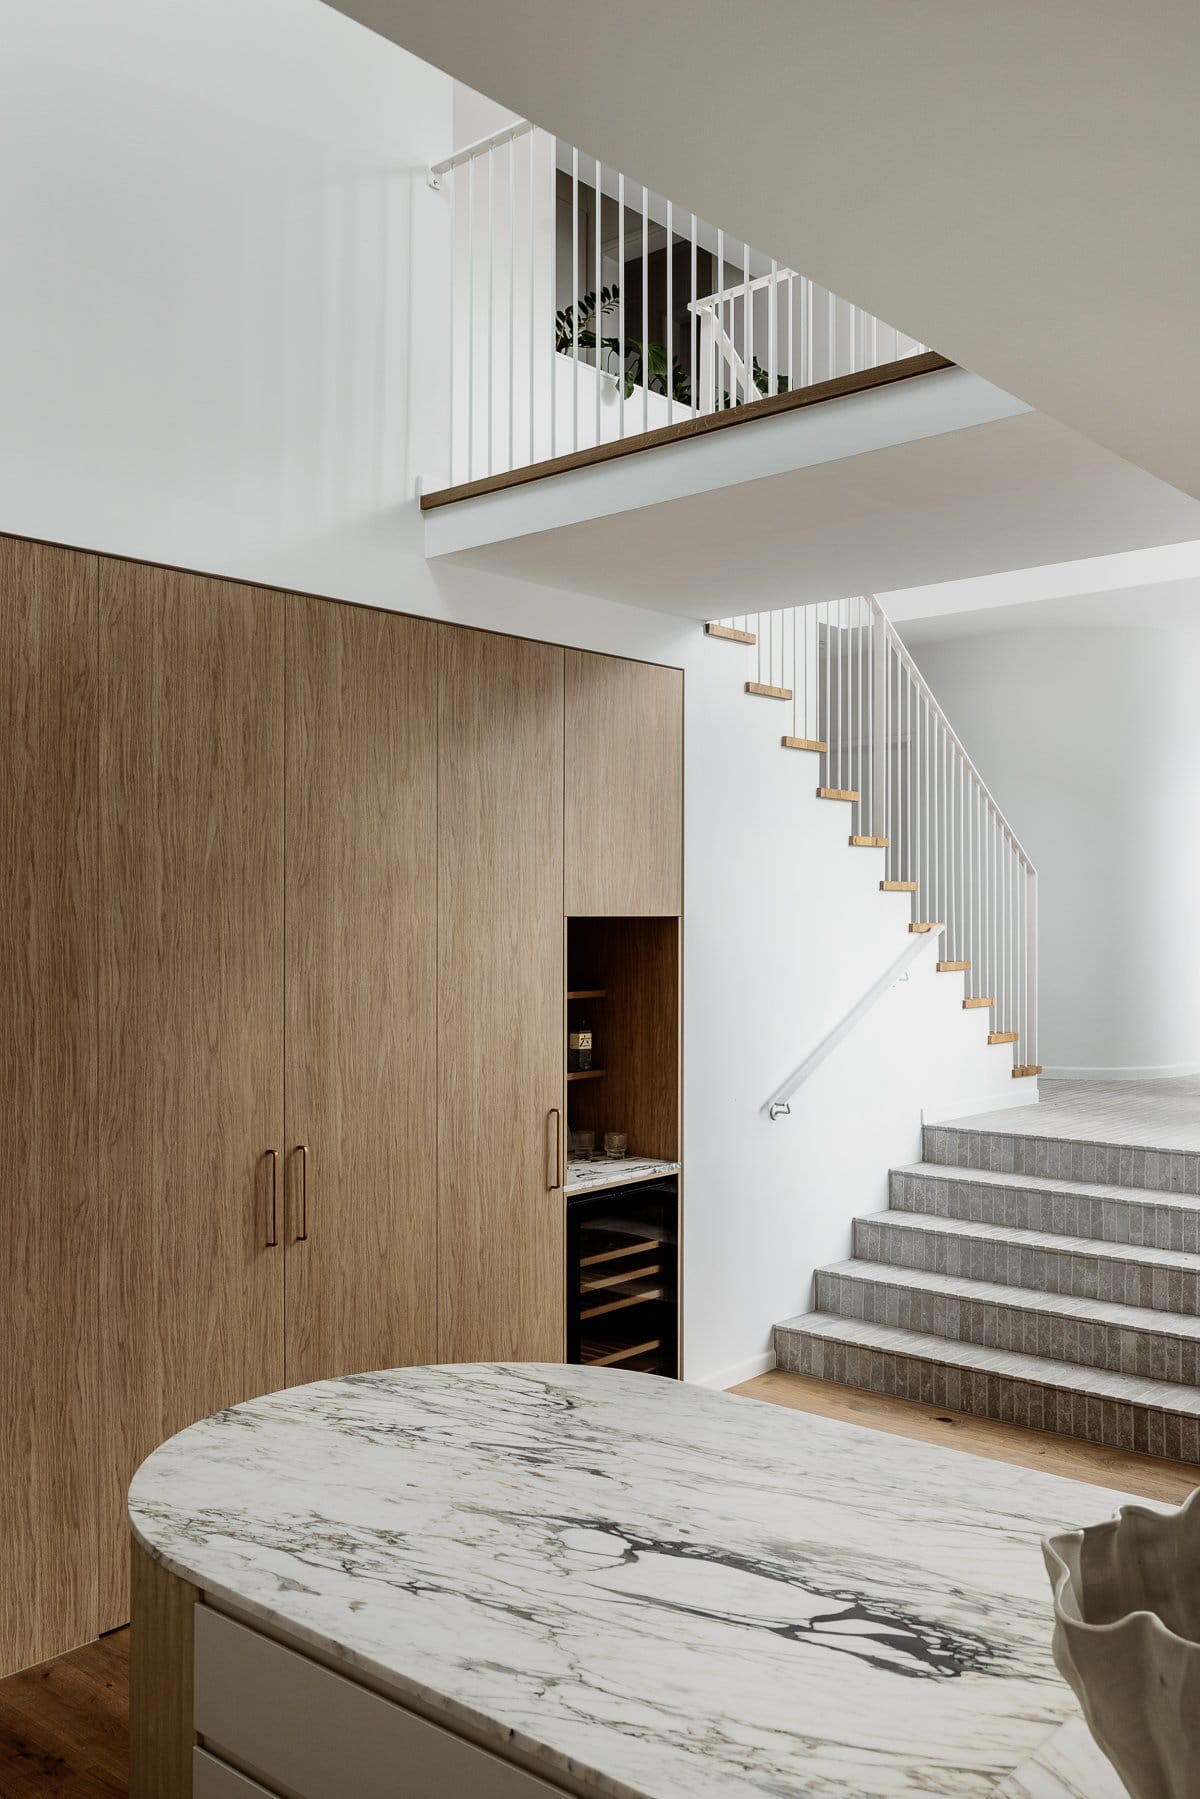 Hazlewood House by Favell Architects. Photography by Andy Macpherson. Kitchen with timber floors and timber cabinetry. White marble countertop. Grey tiled steps leading away from kitchen, white and timber staircase to left of image. 